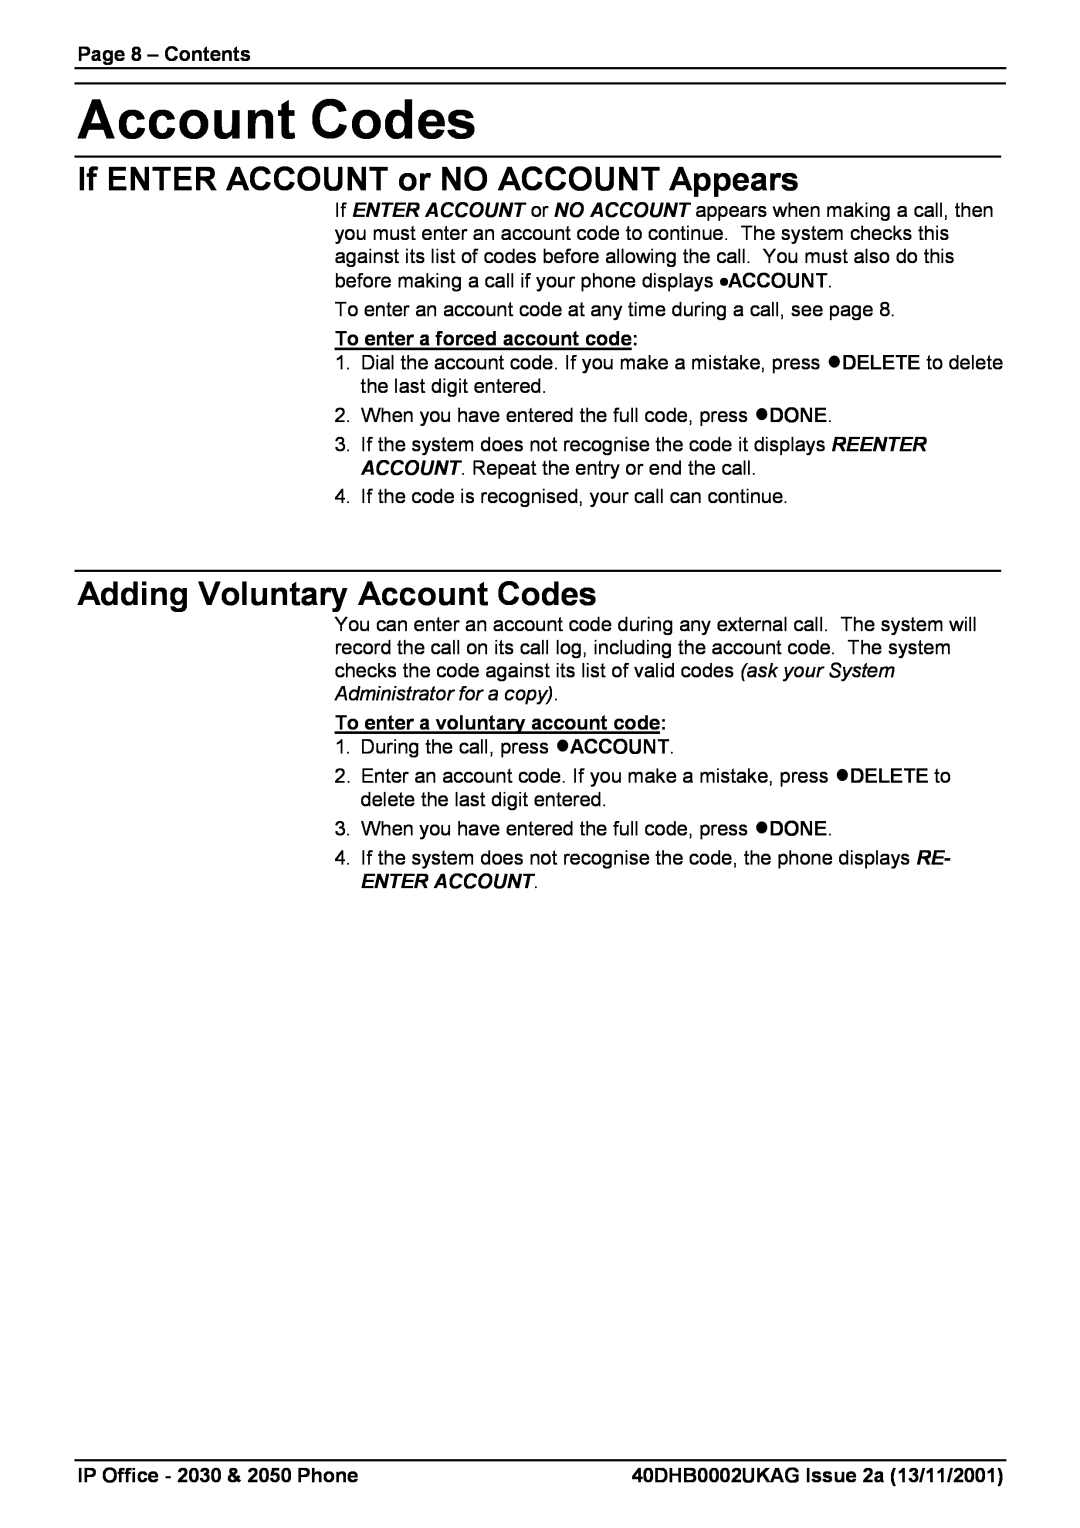 Avaya 2050 If ENTER ACCOUNT or NO ACCOUNT Appears, Adding Voluntary Account Codes, Page 8 - Contents, Enter Account 